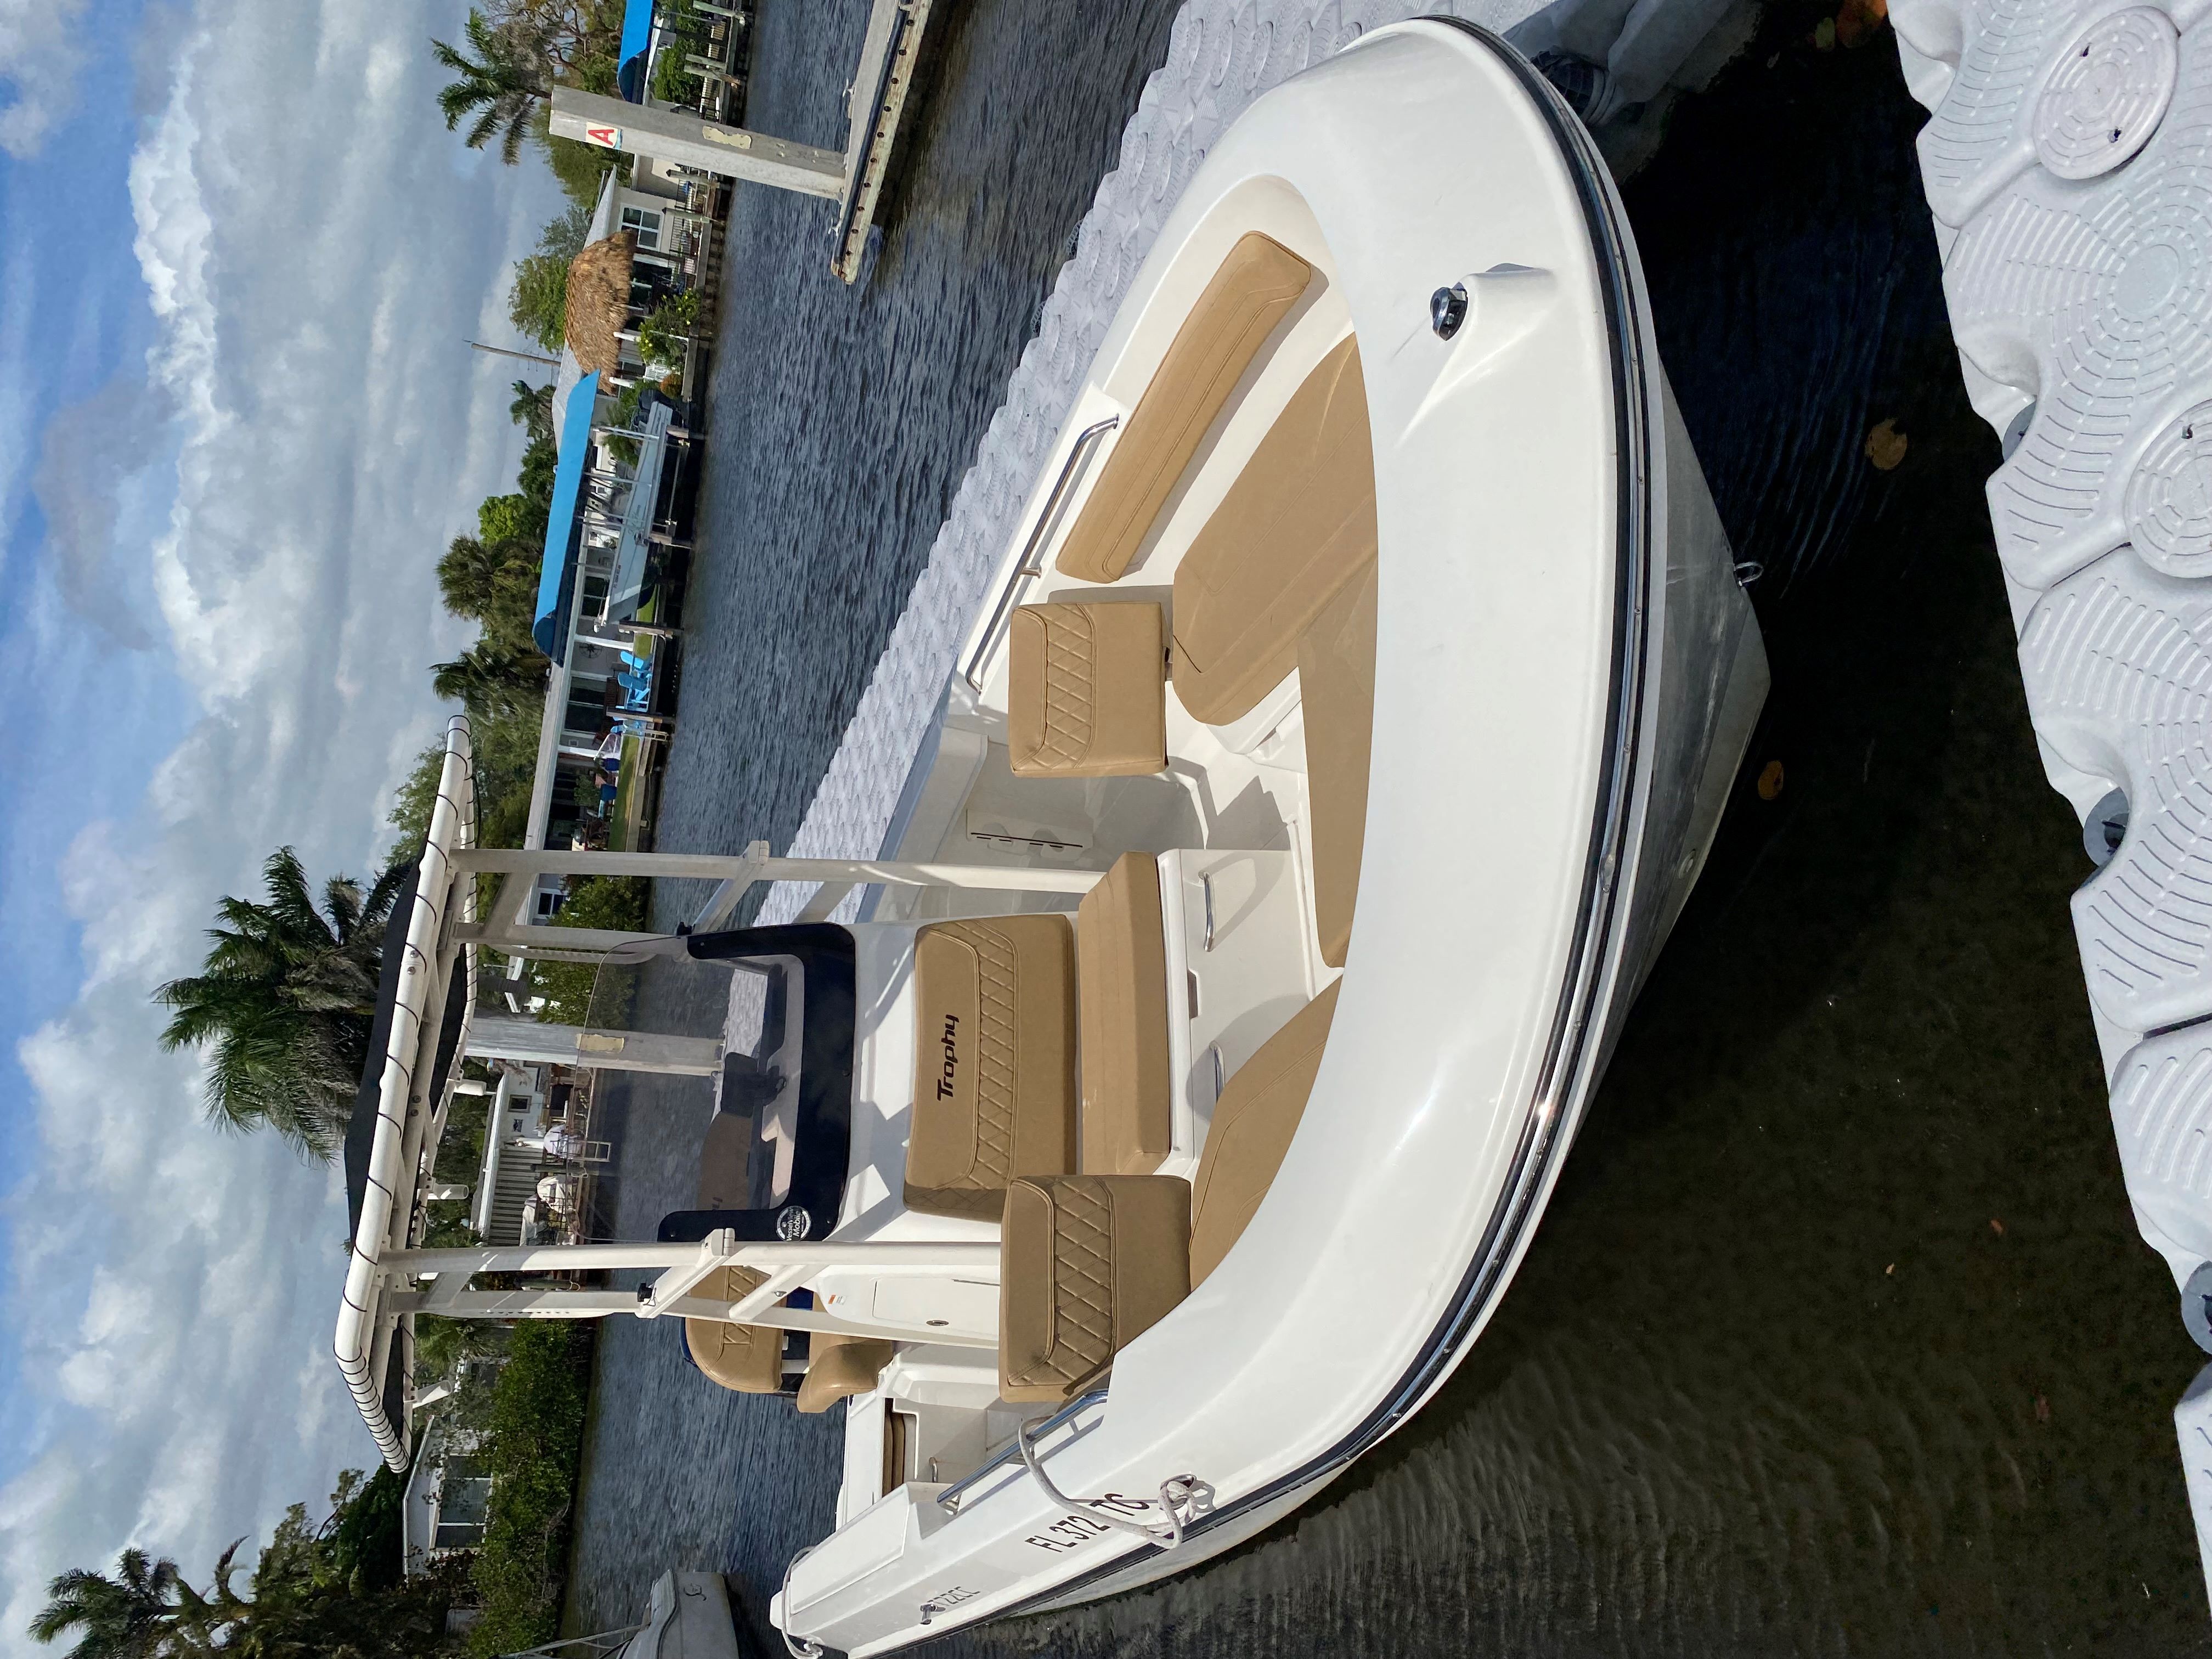 COARSELY CHOPPED (23 FT Bayliner Trophy Center Console - 150 HP~Fishing)